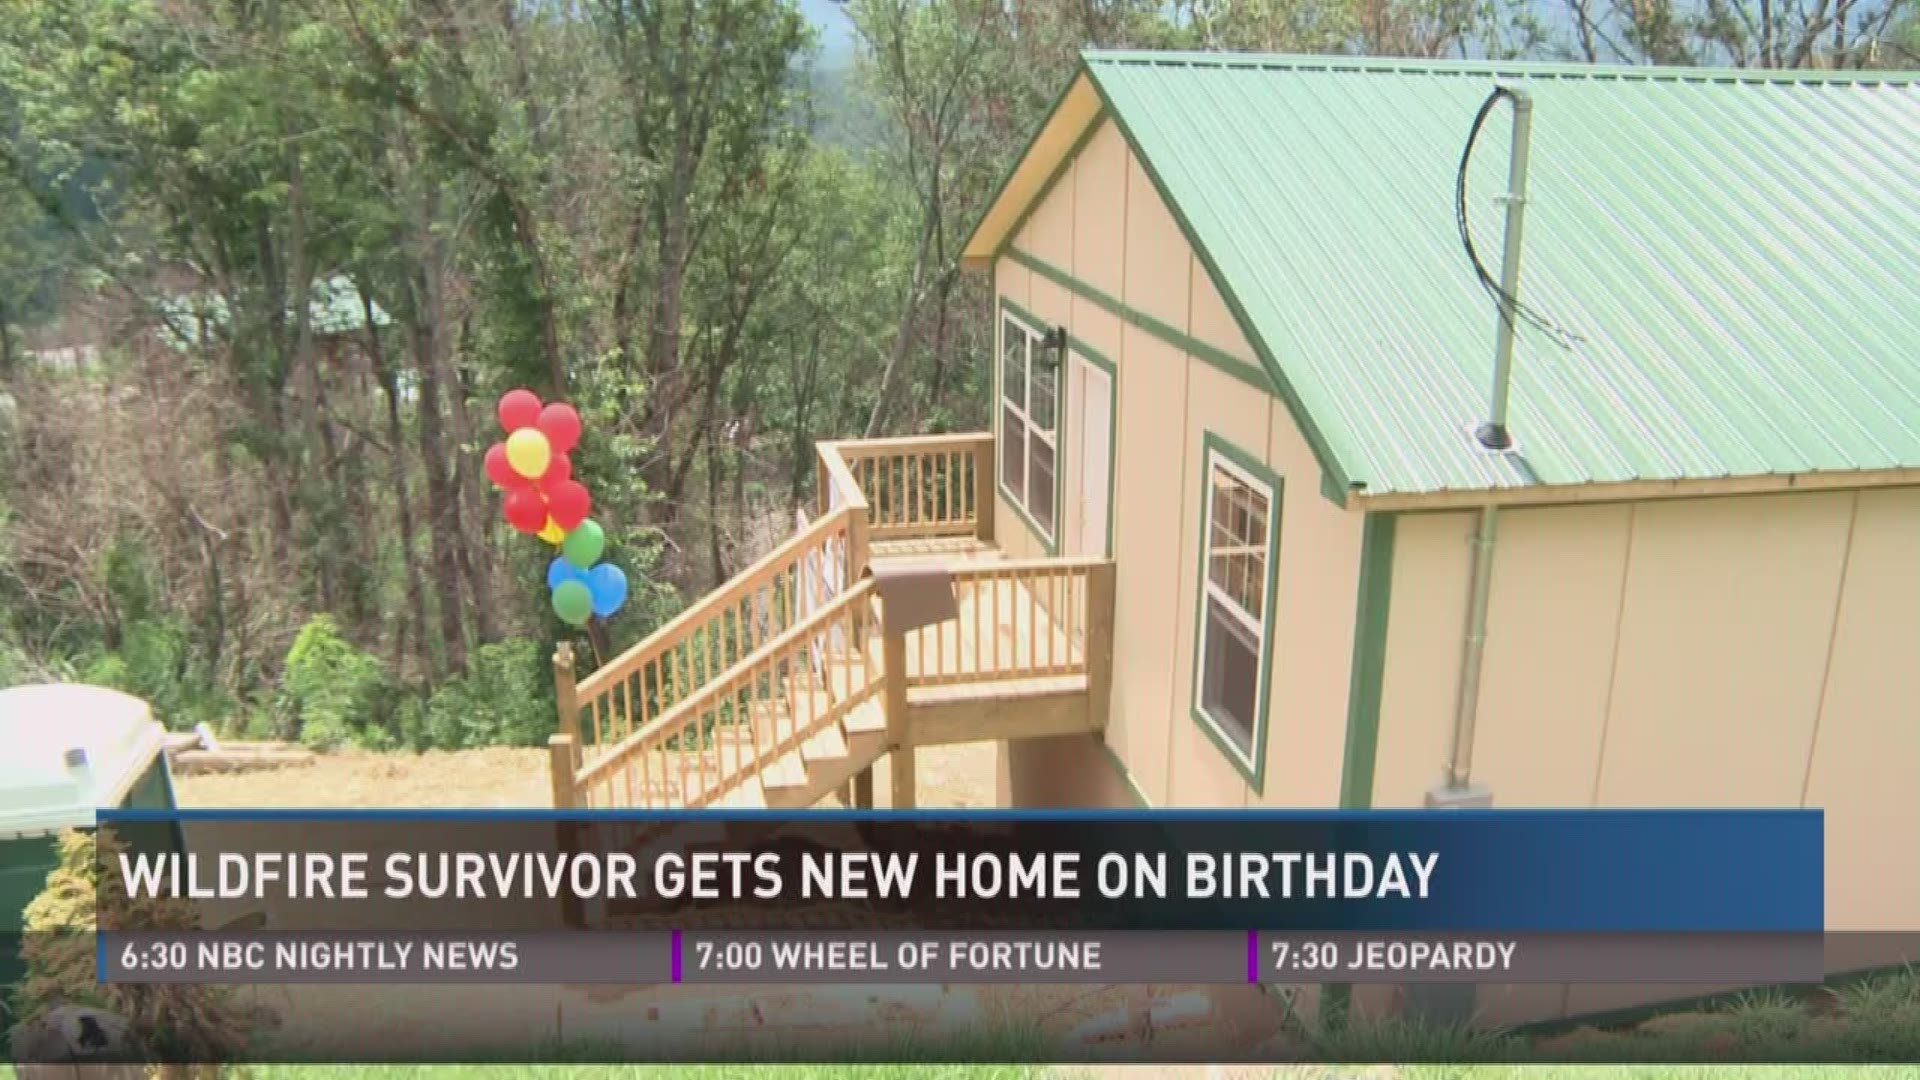 Aug. 4, 2017: A Gatlinburg man whose home was destroyed during the November wildfires received the keys to a new home on his birthday.